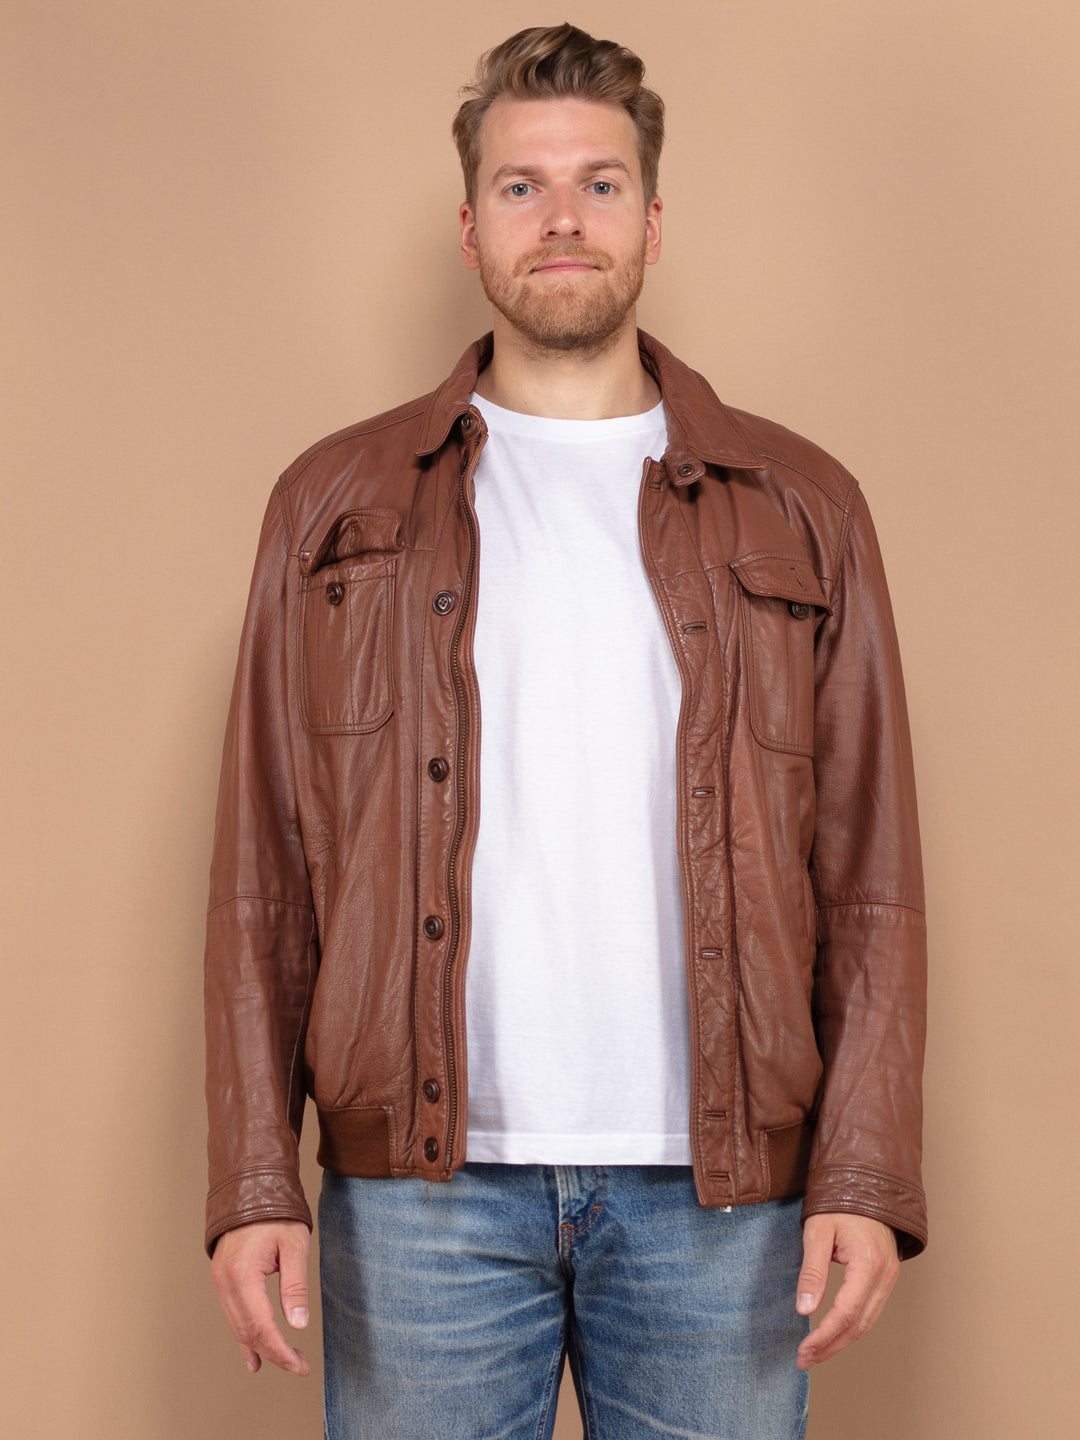 Men Leather Jacket 00's, Classic Brown Leather Jacket Size Large L, Timeless Leather Jacket, Retro Outerwear, Leather Blazer Jacket 00's